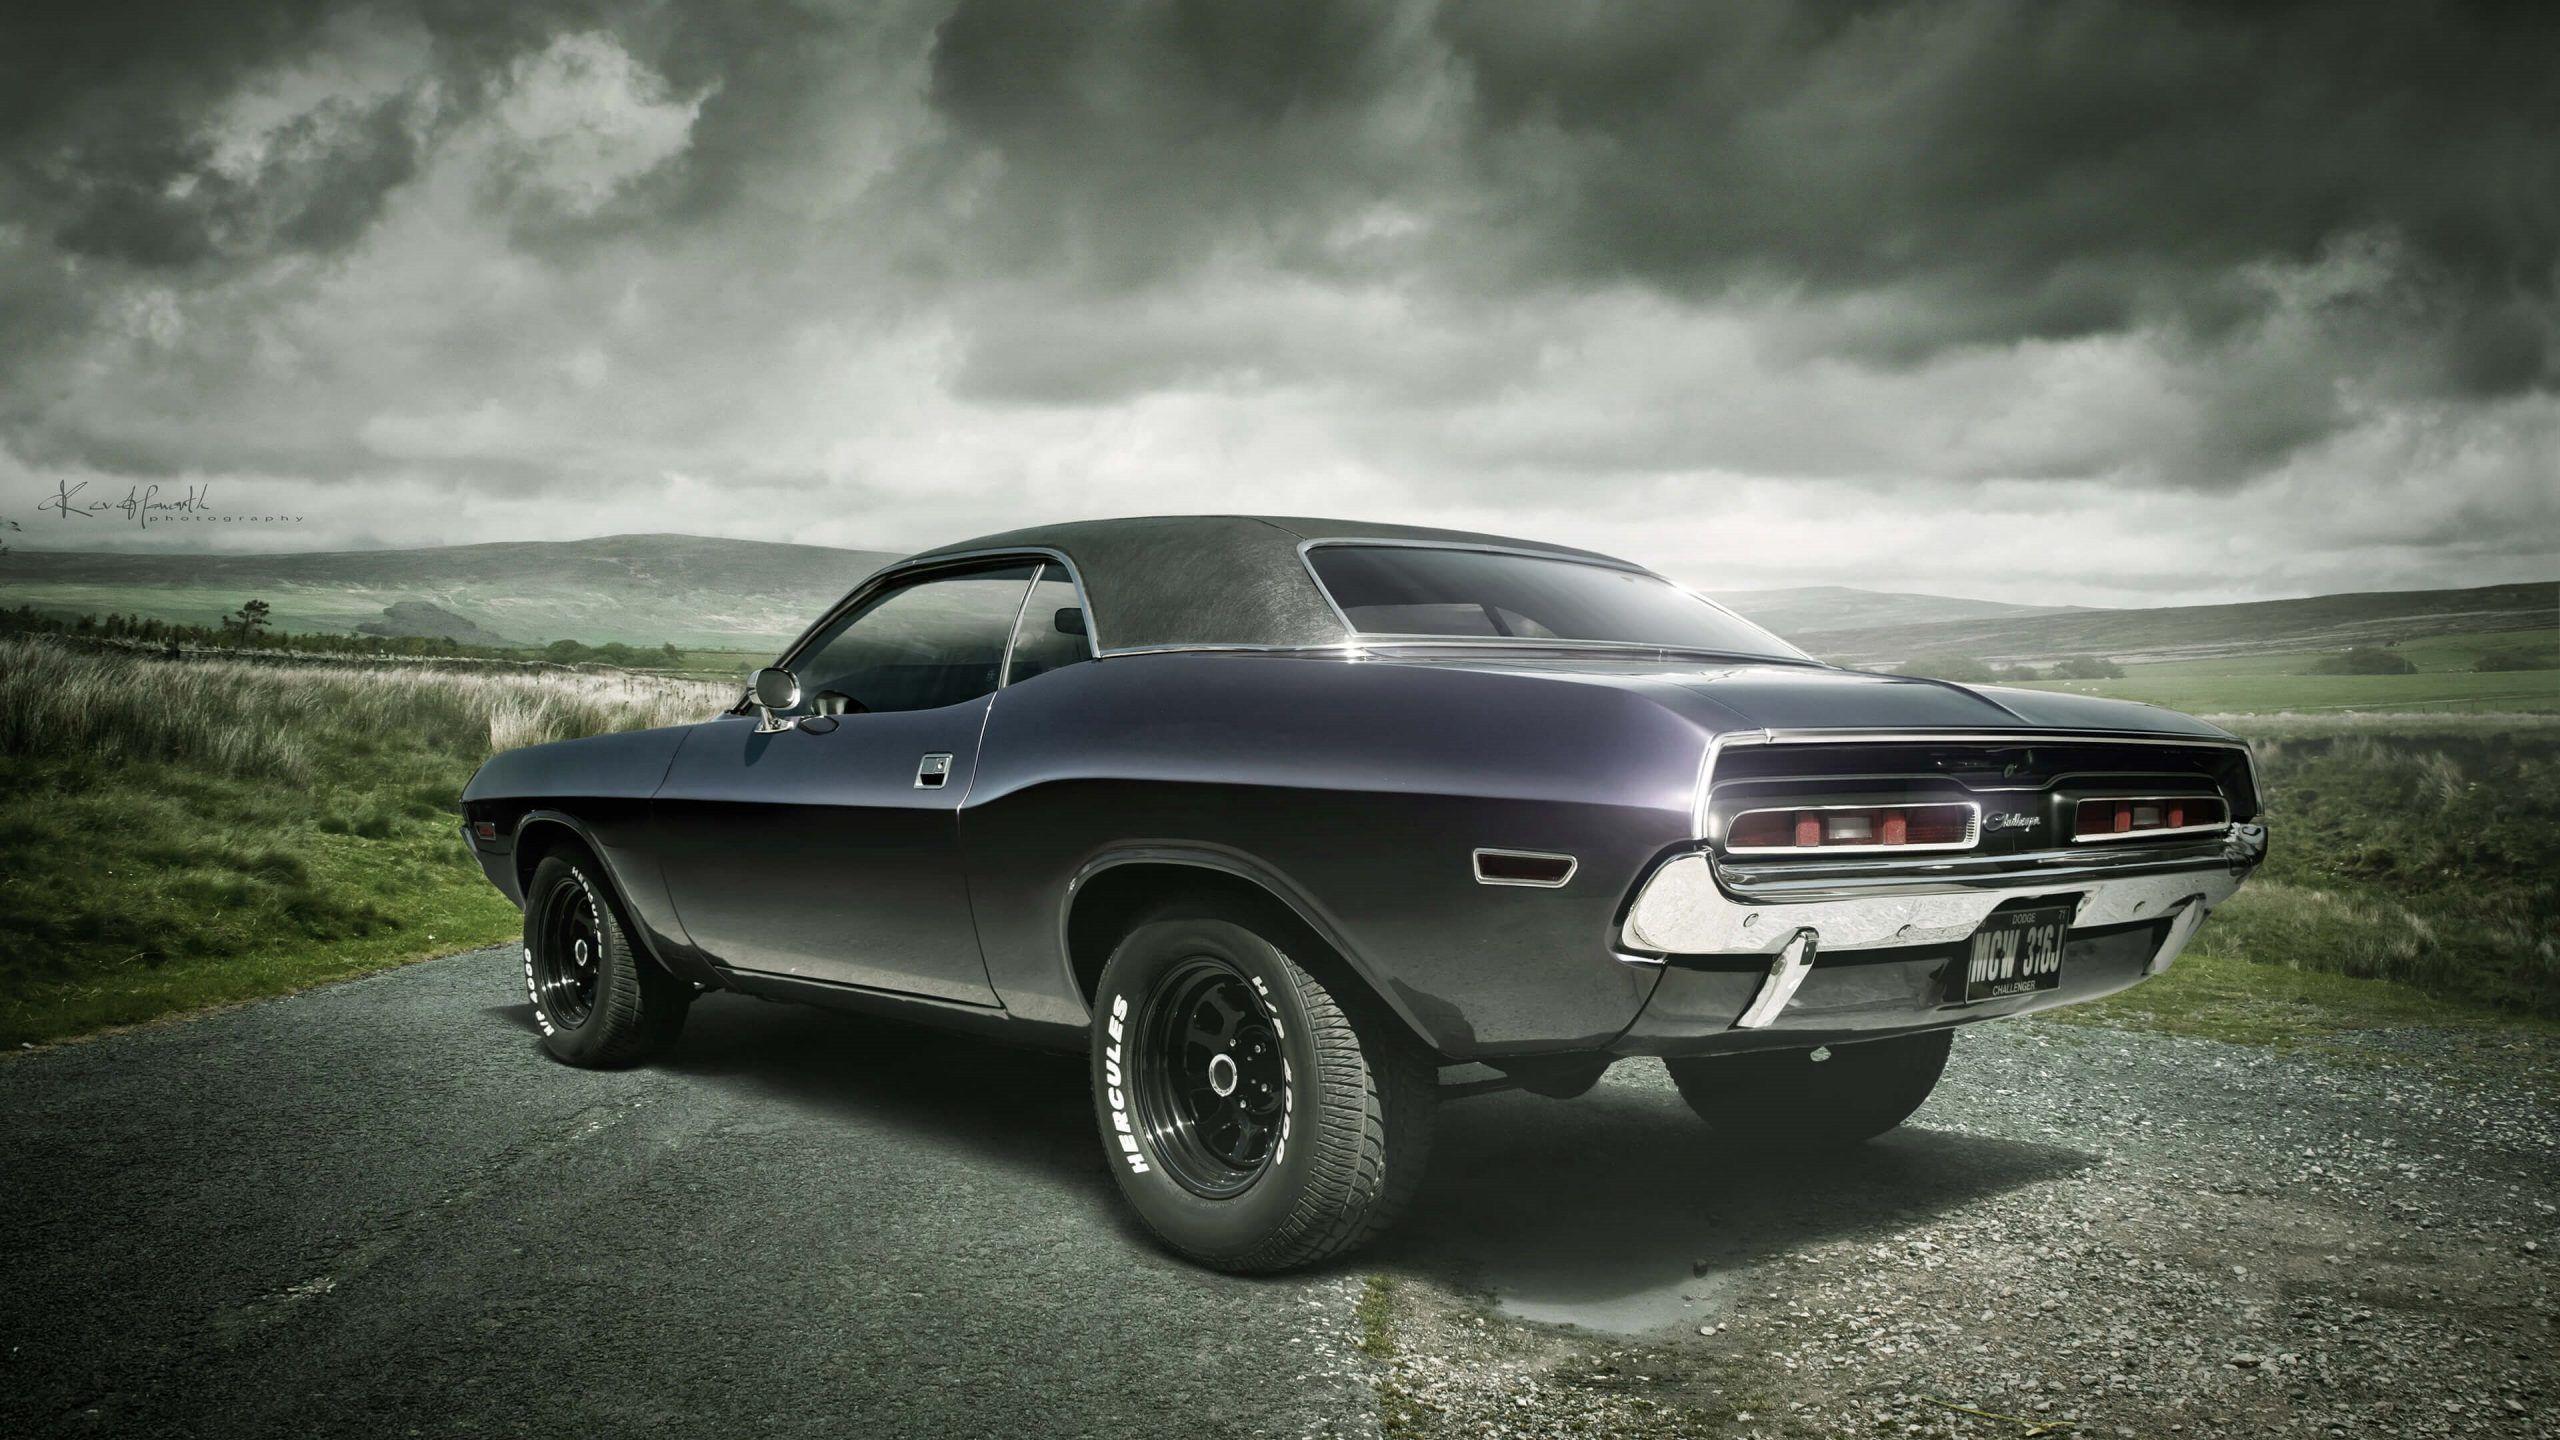 Pictures of old muscle cars